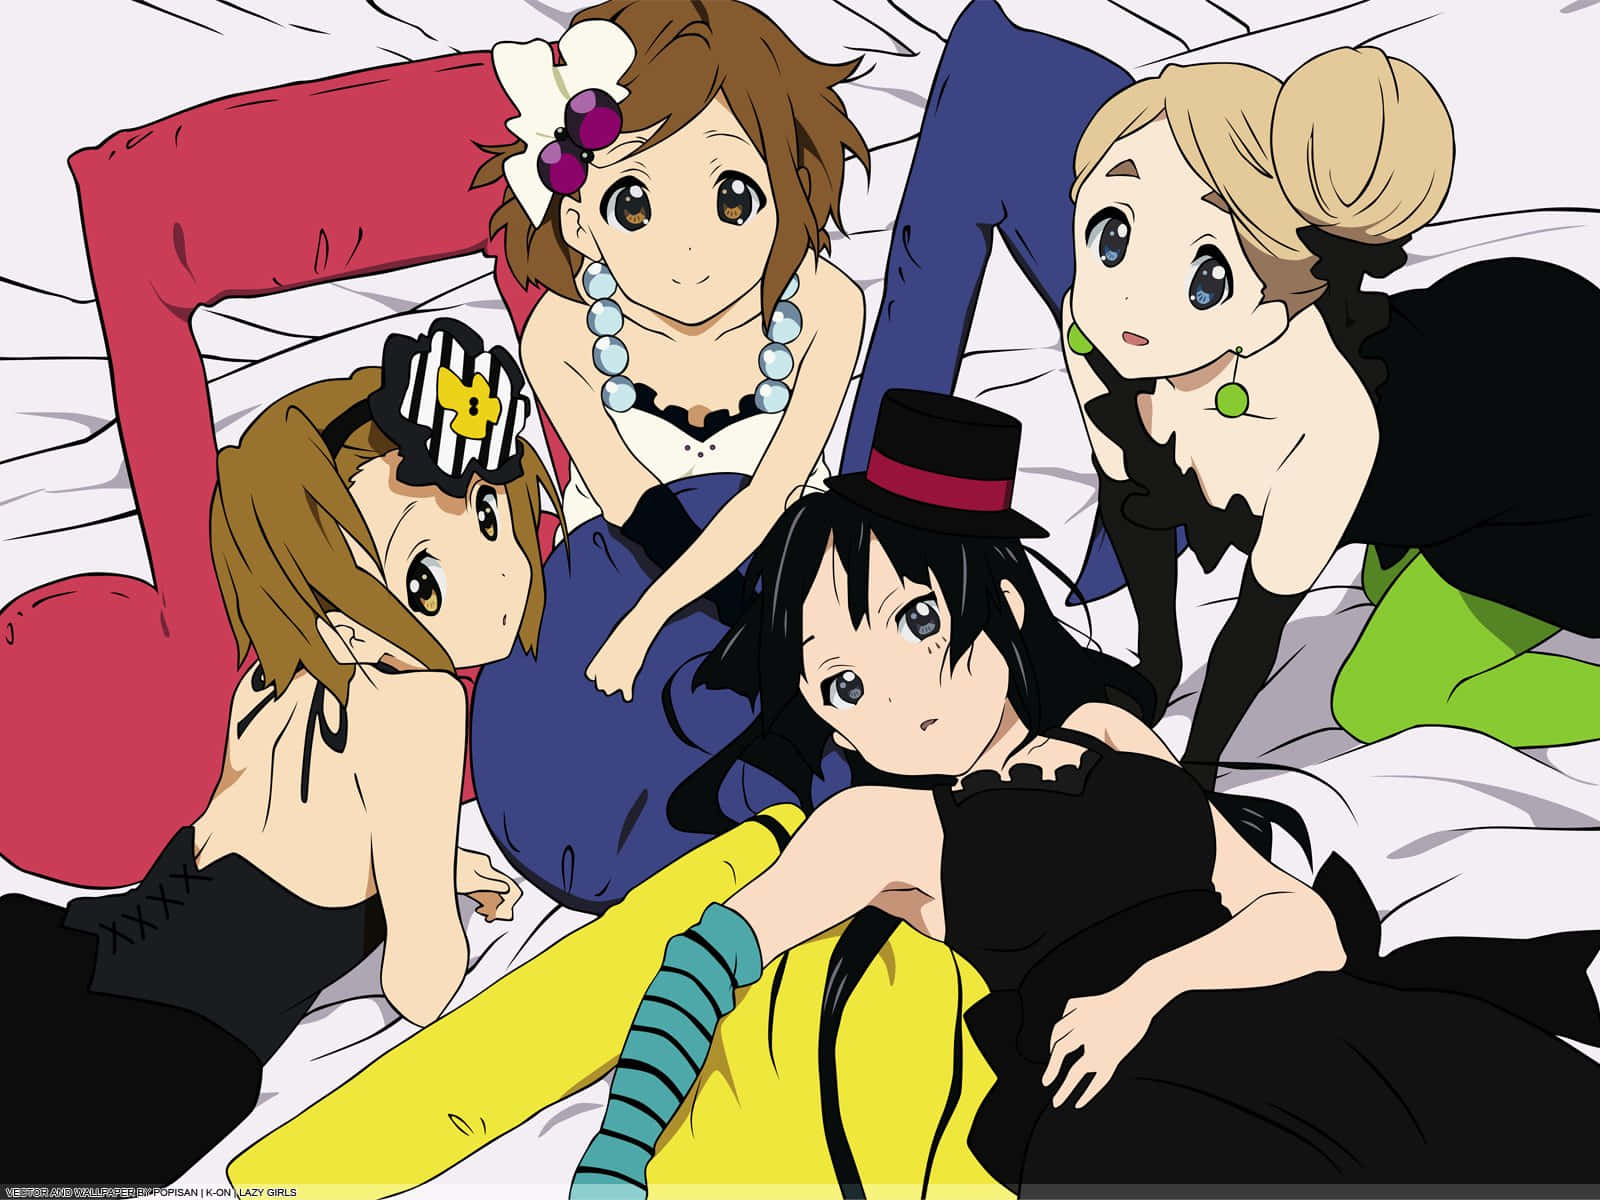 K-on Girls Out to Enjoy the Day